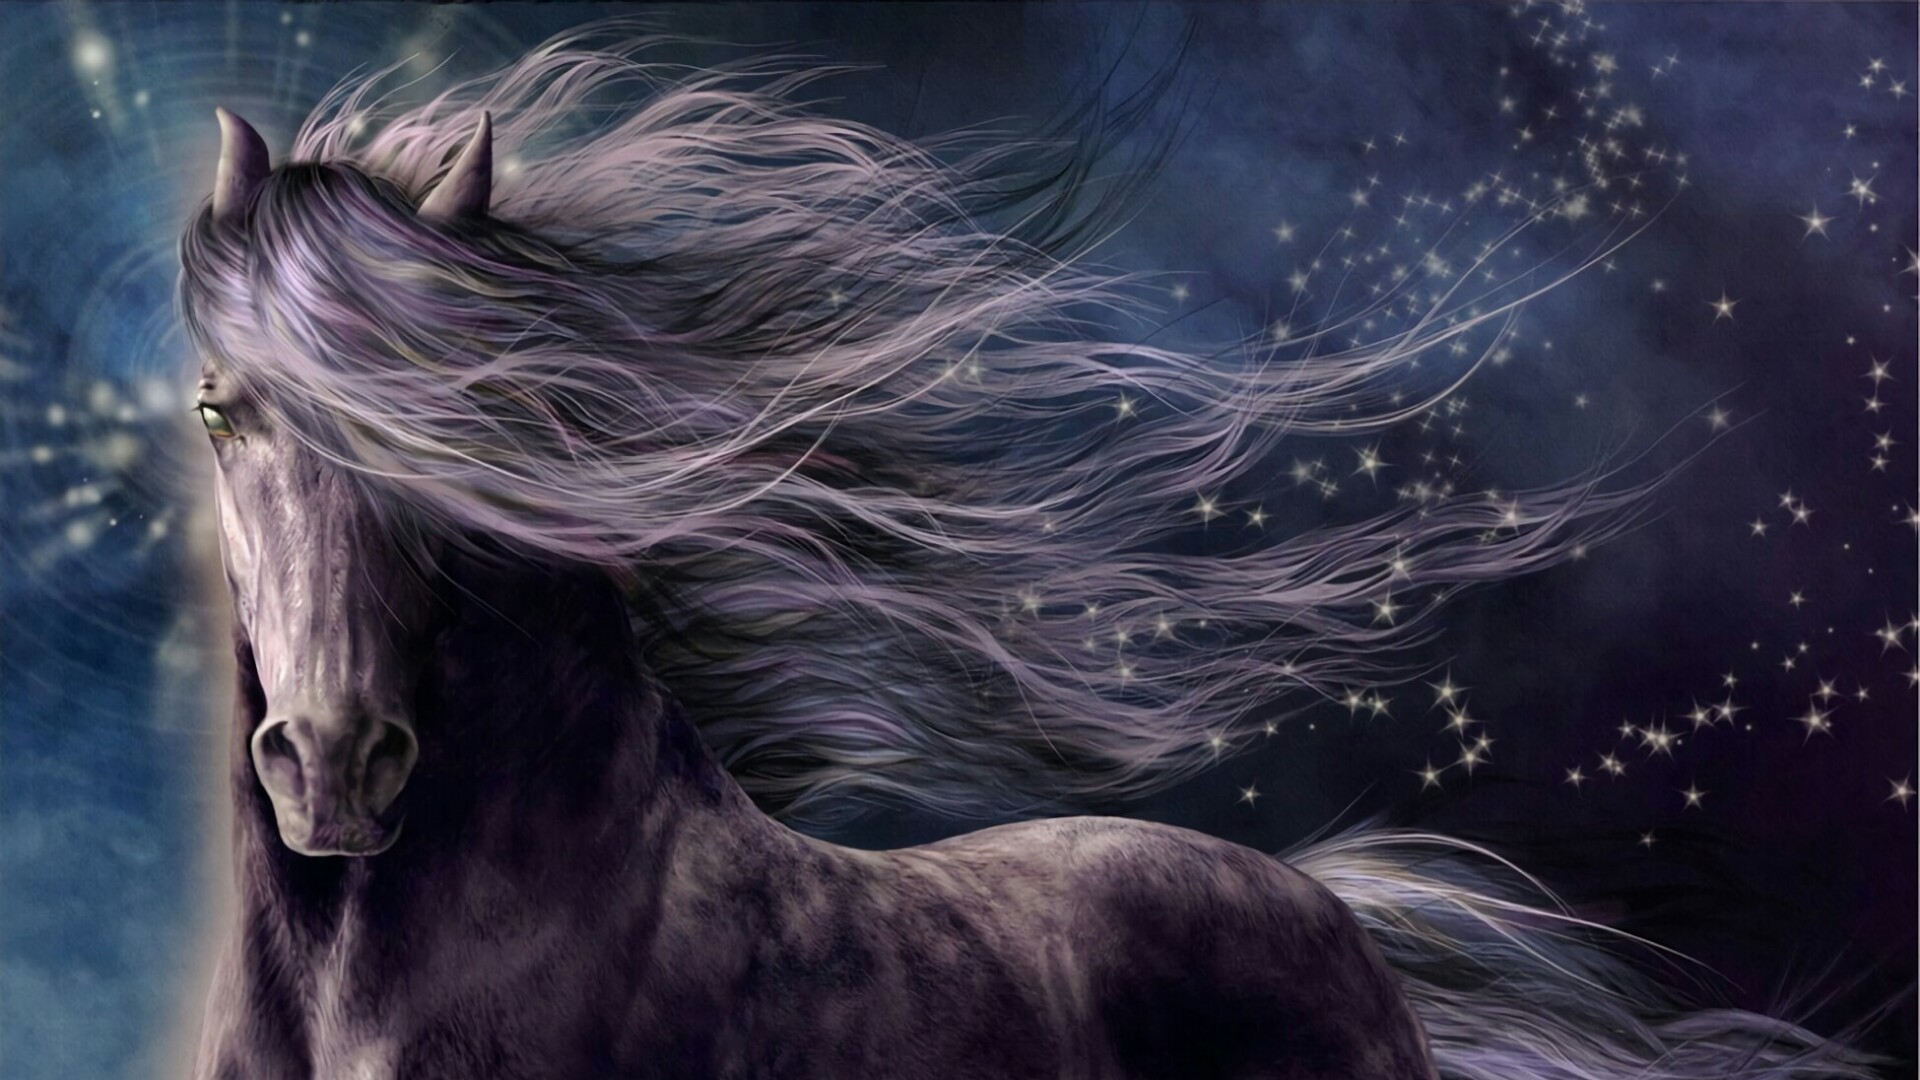 1920x1080 Title. Dreamy horse with stars - Fantasy art